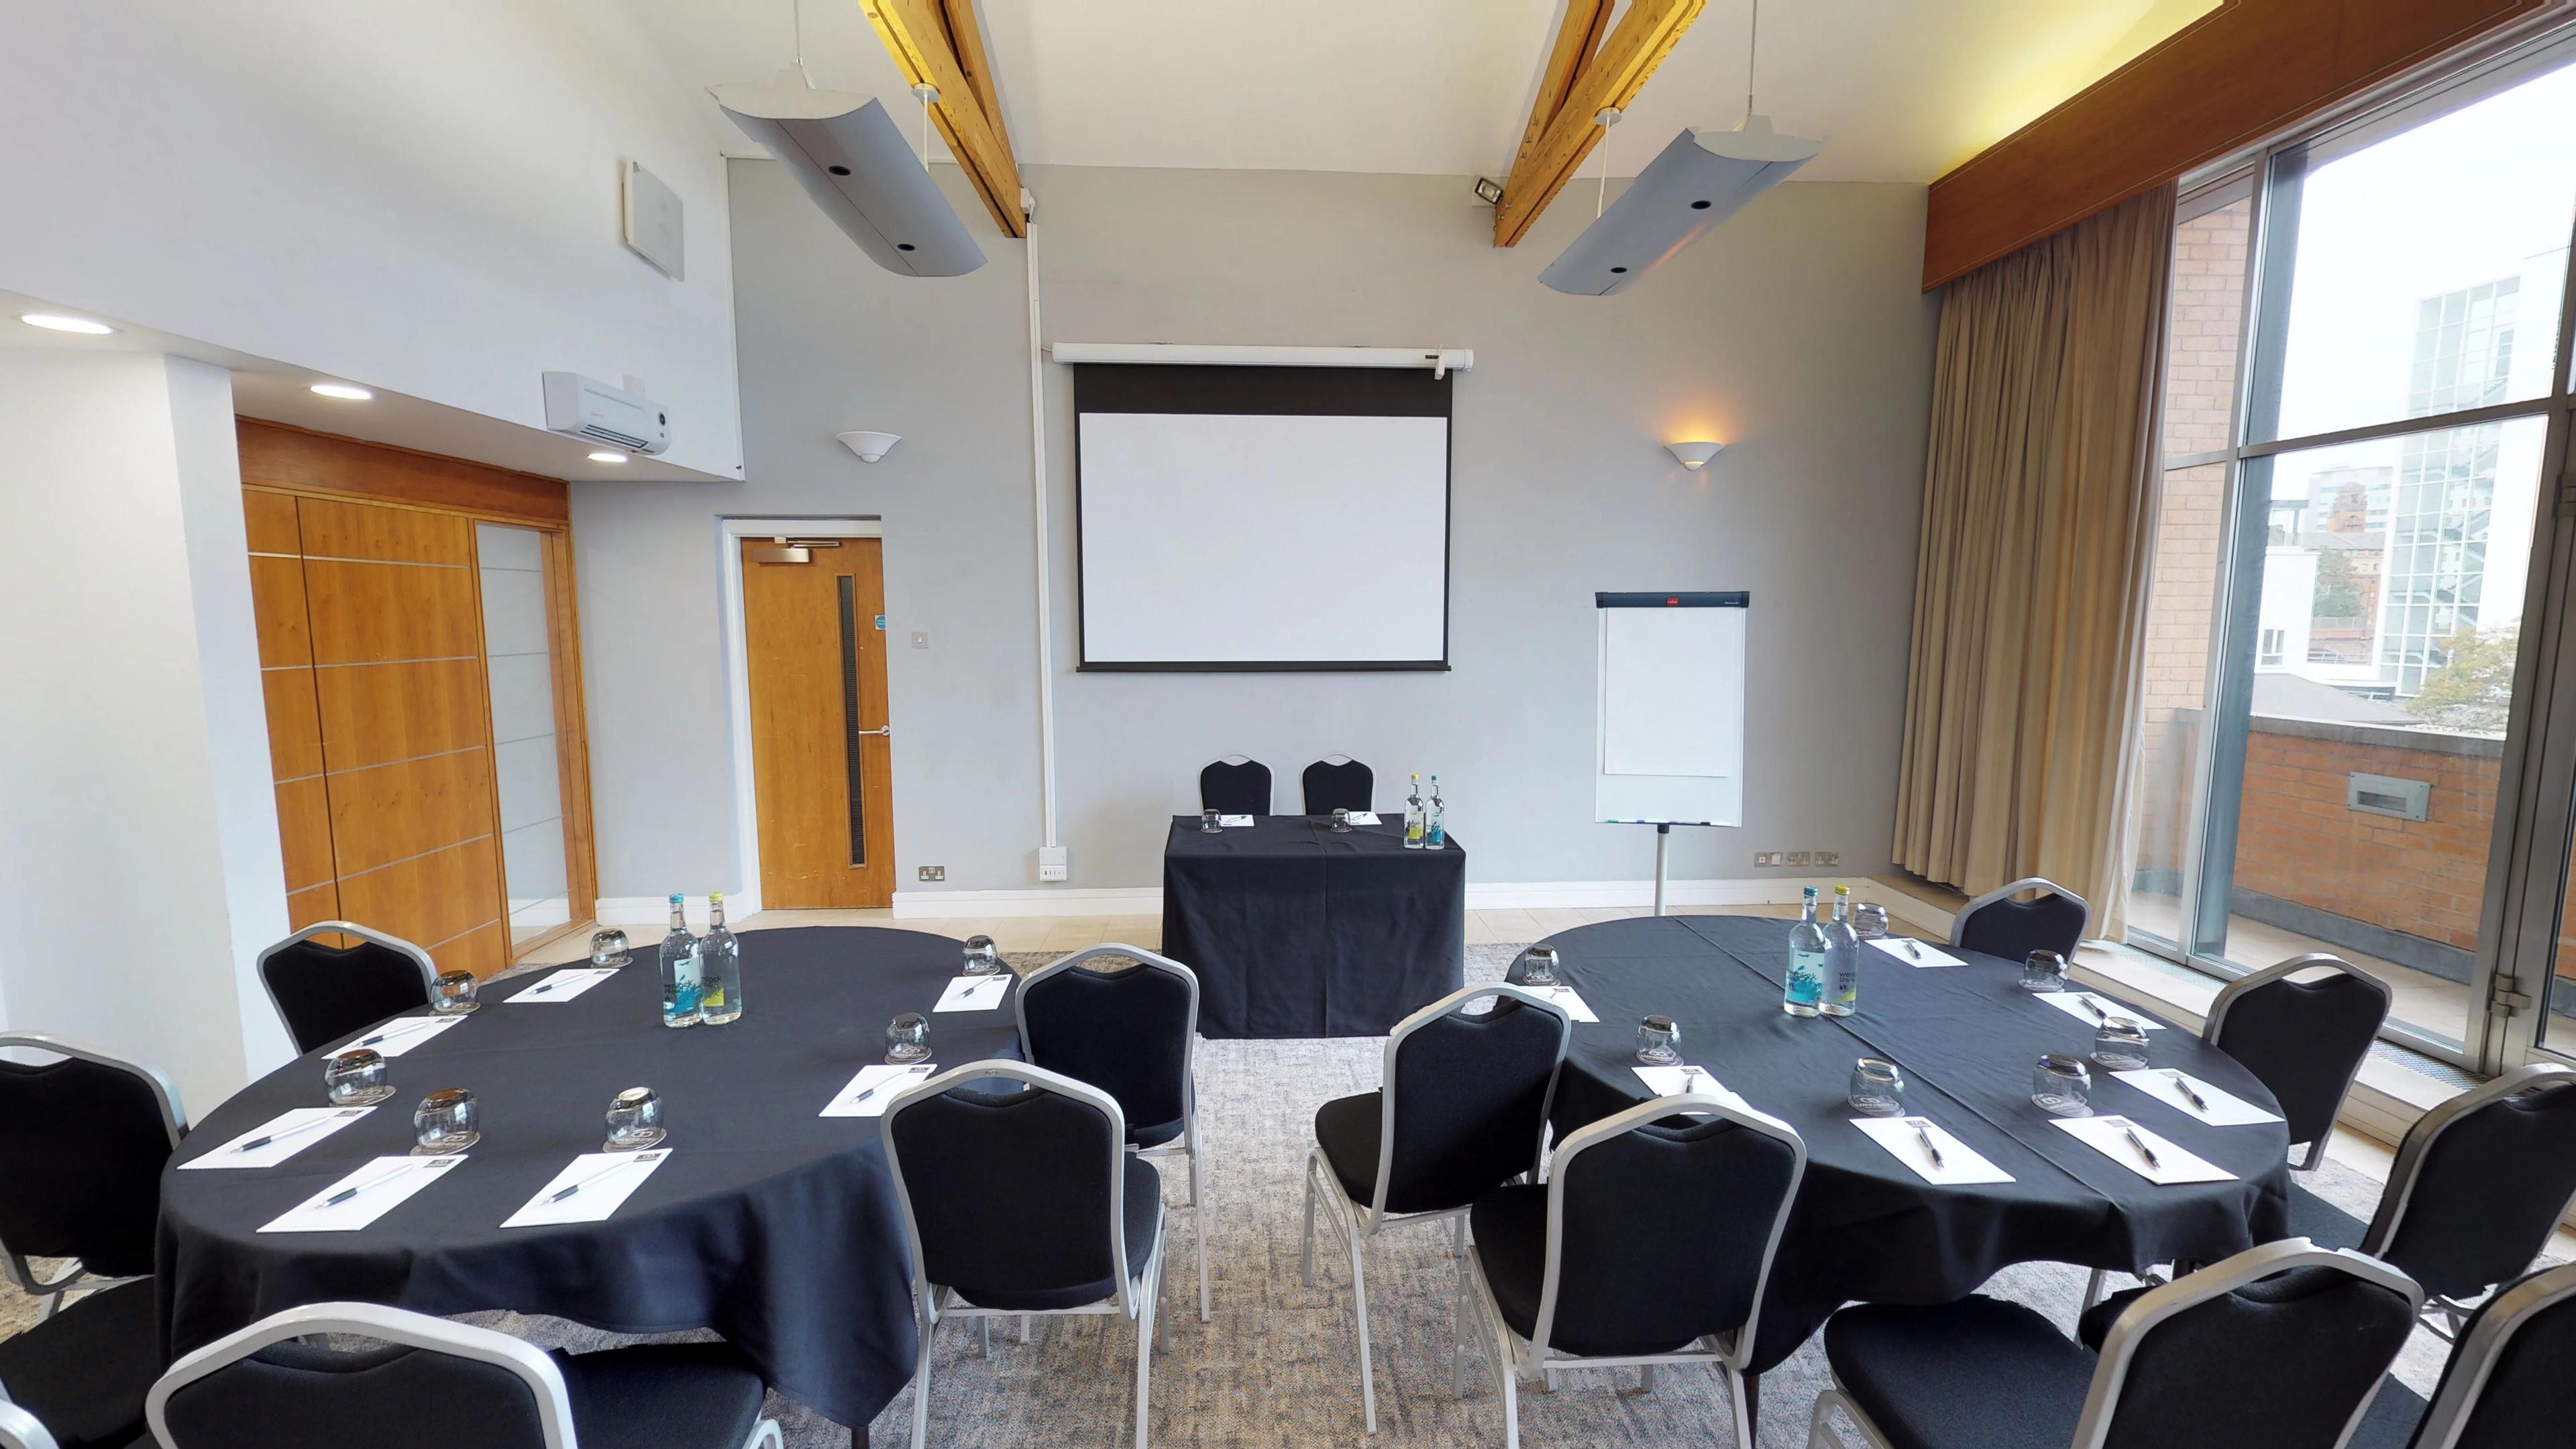 Edgerton Suite, The Pendulum Hotel And Manchester Conference Centre photo #1